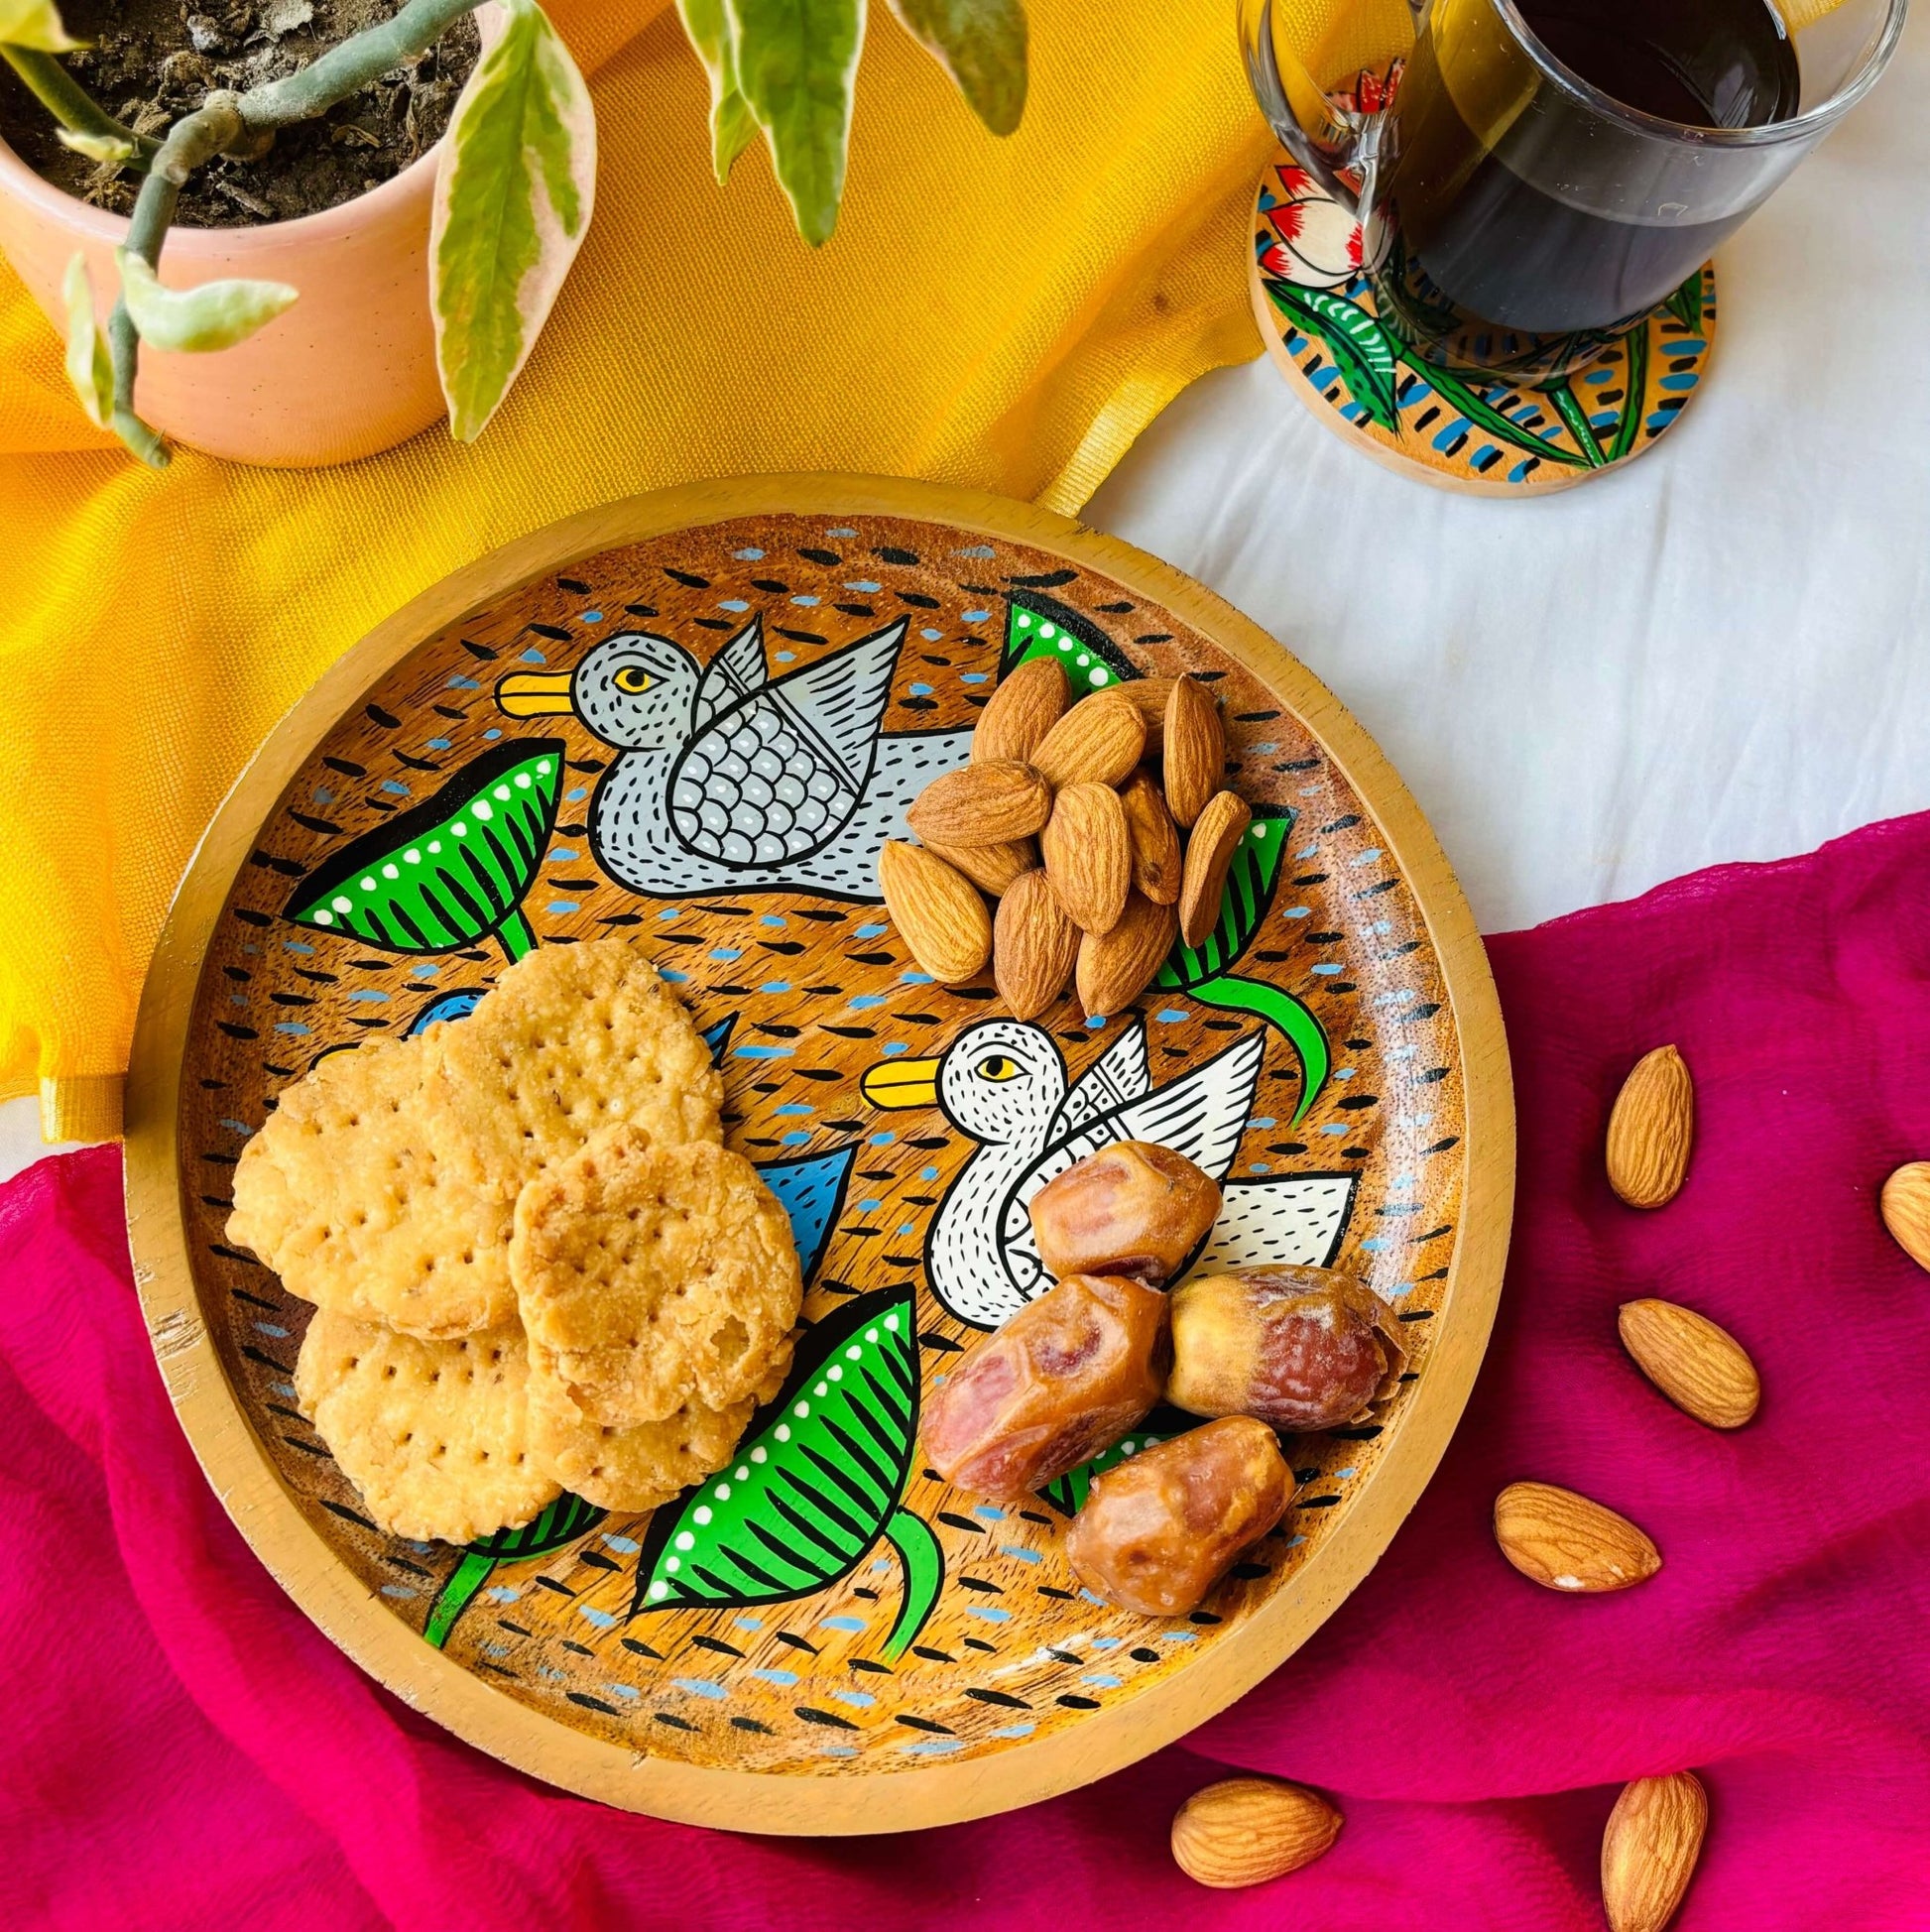 Biscuits, dates and almonds are served in a handcrafted mango wood round wooden tray or a trinket tray, painted with three birds by generational Pattachitra artists